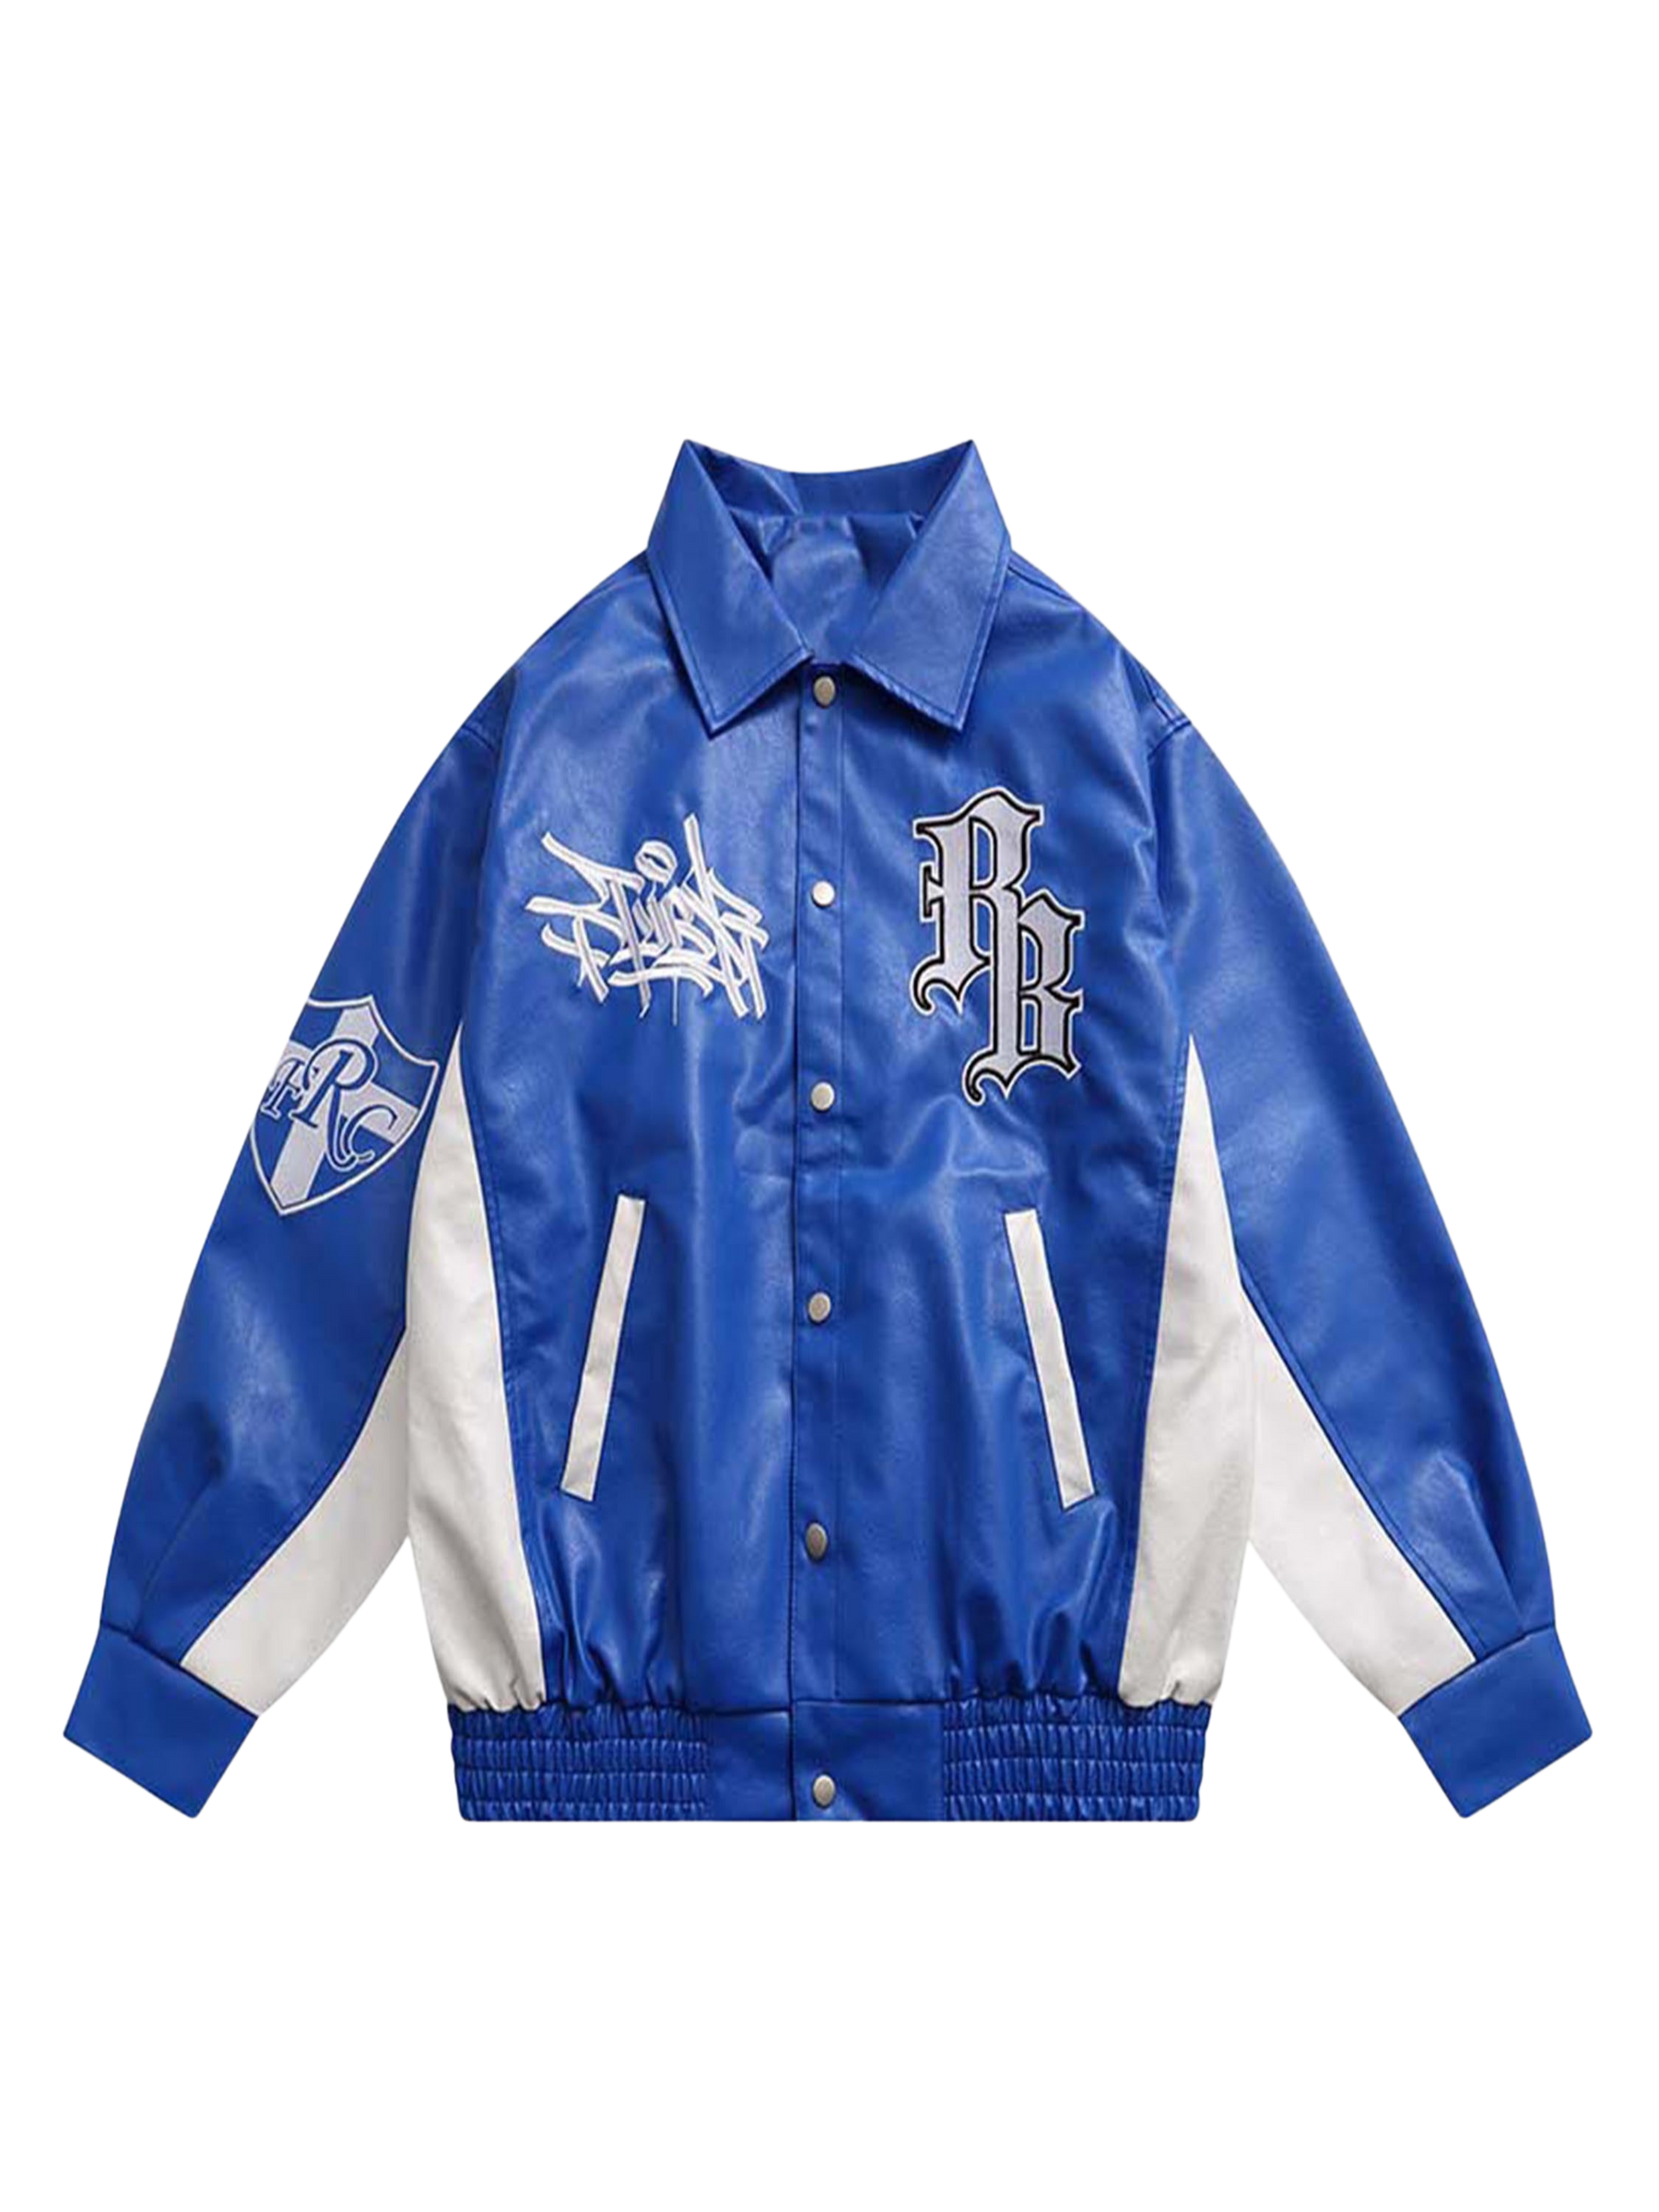 LUXENFY™ - Embroidered Stitching PU Leather Baseball Jacket luxenfy.com